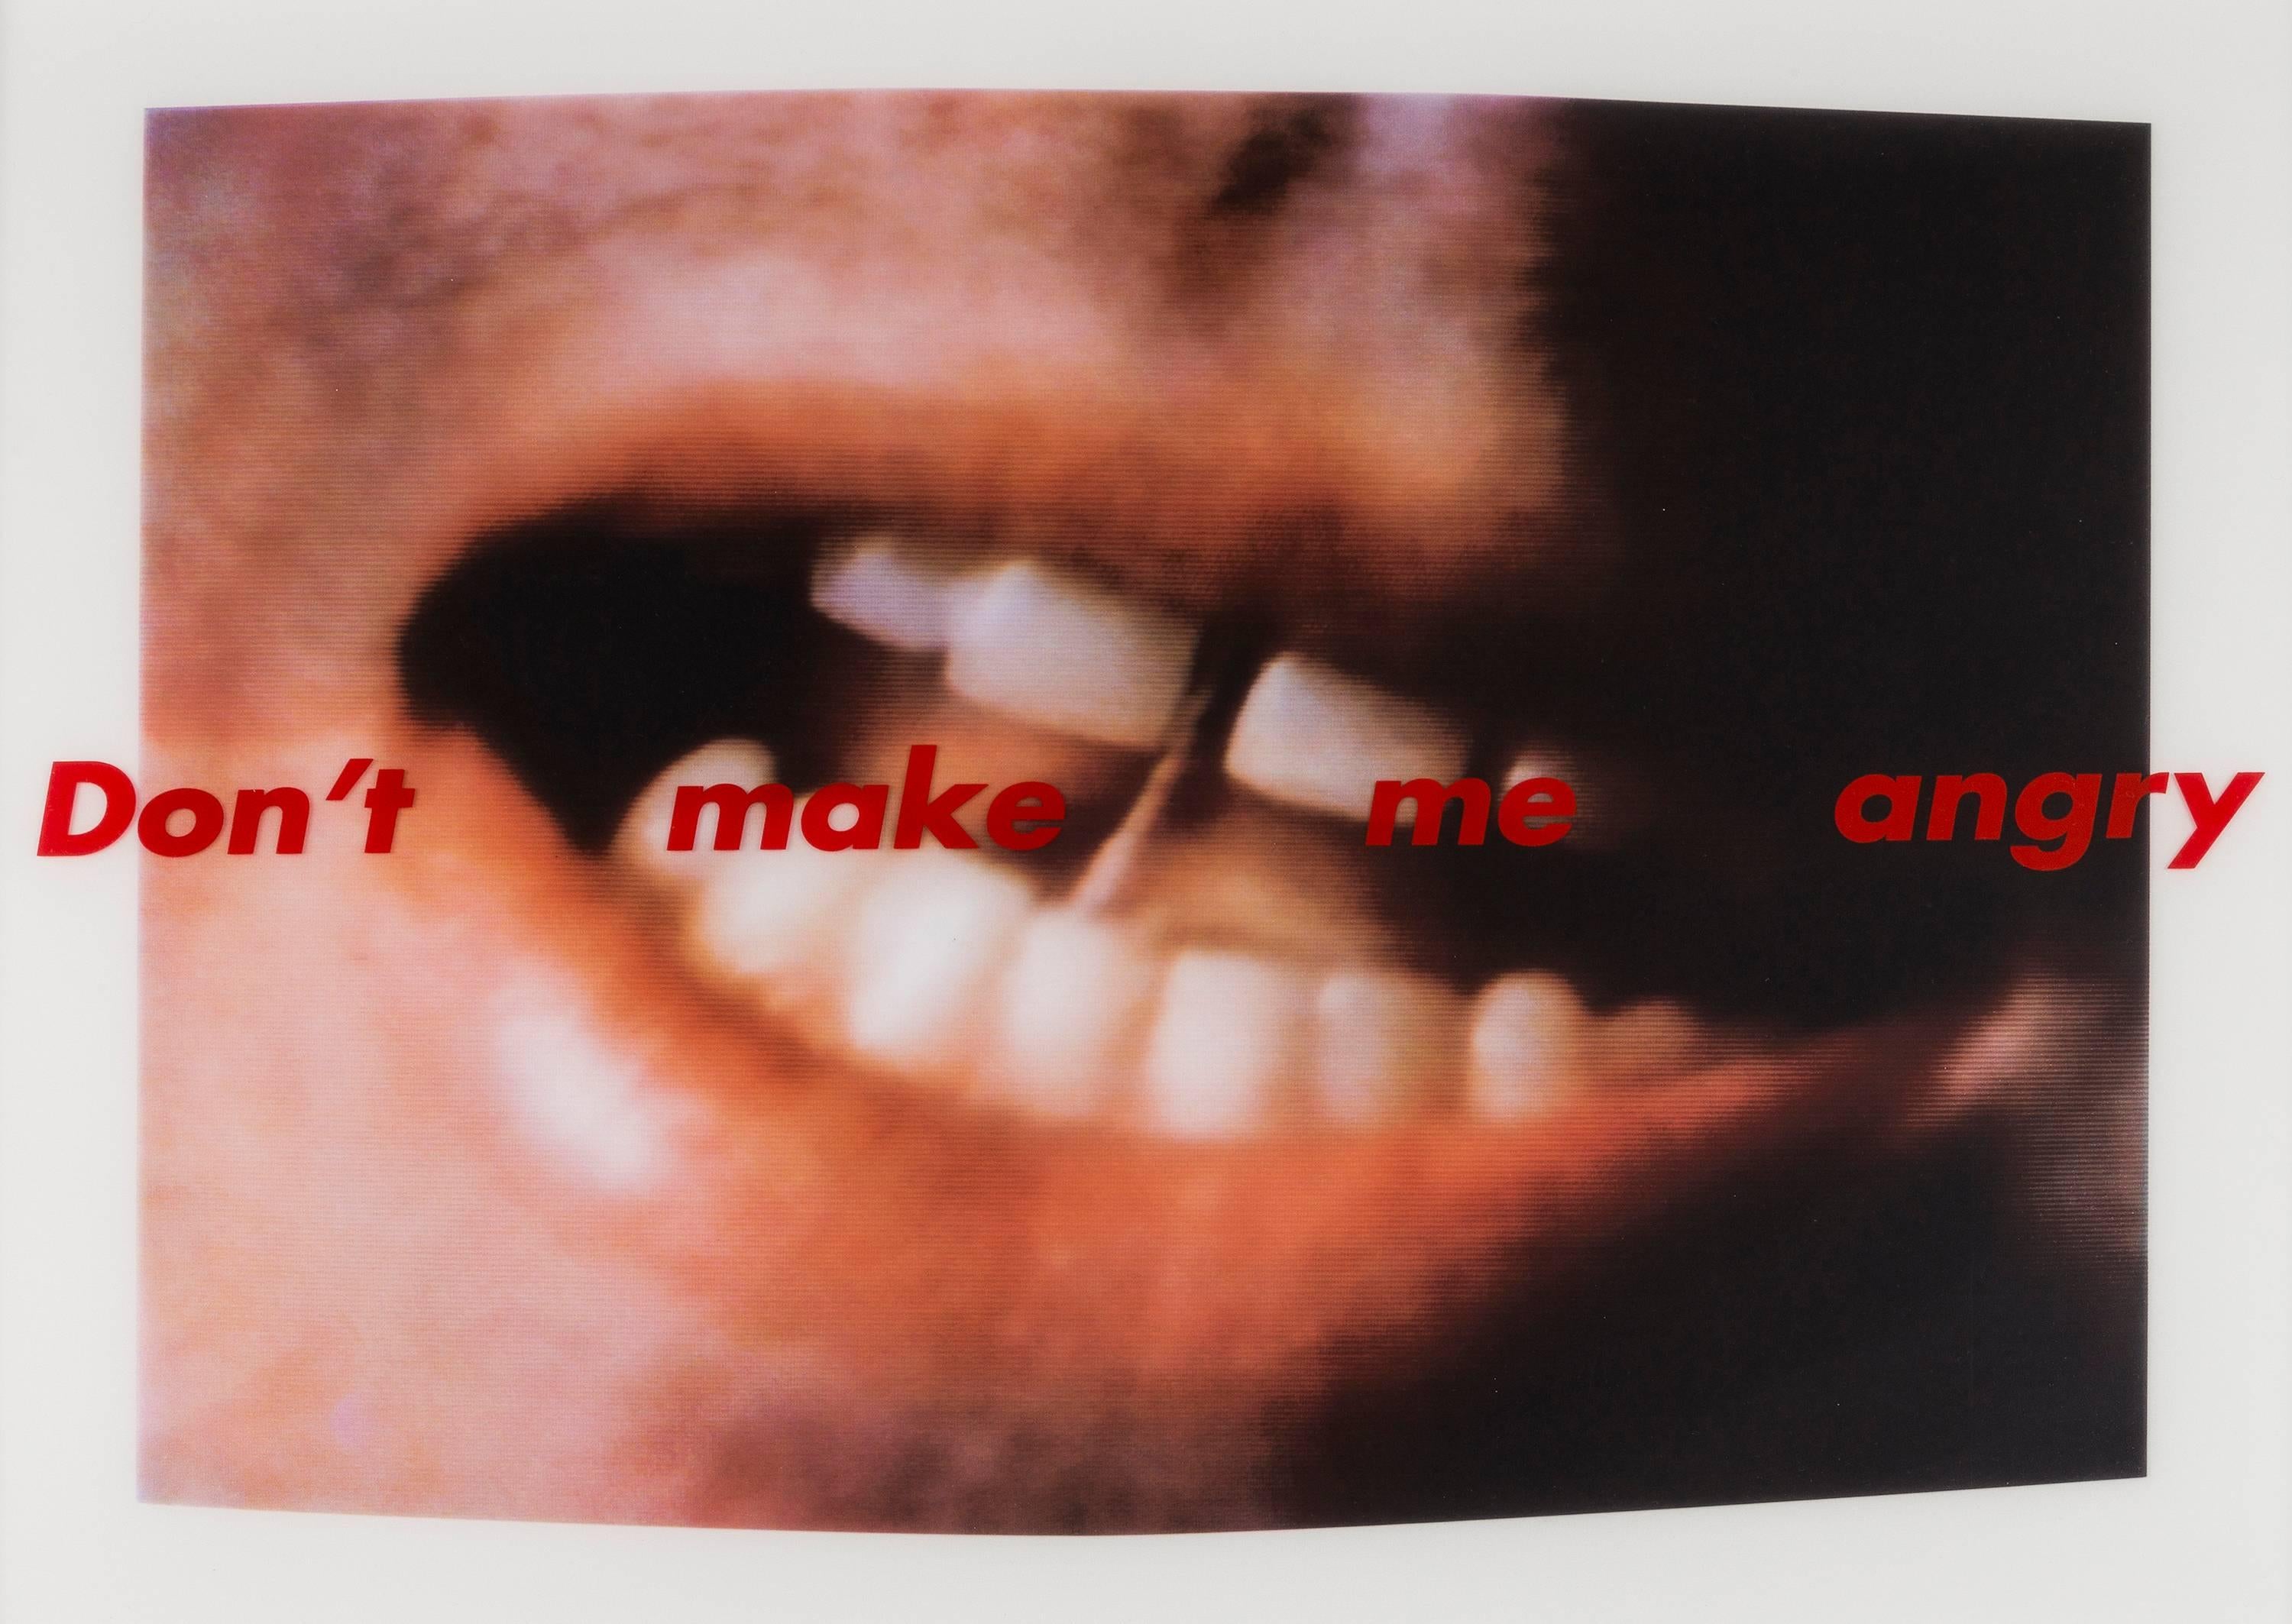 Don't Make Me Angry, 1999
Barbara Kruger

Screenprint in colours on vinyl
Unsigned, numbered from the edition of 50
Produced for Yvon Lambert and published on the occasion of the exhibition Barbara Kruger: Pouvoir, Plaisir, Désir, Dégoût
Sheet: 49 ×